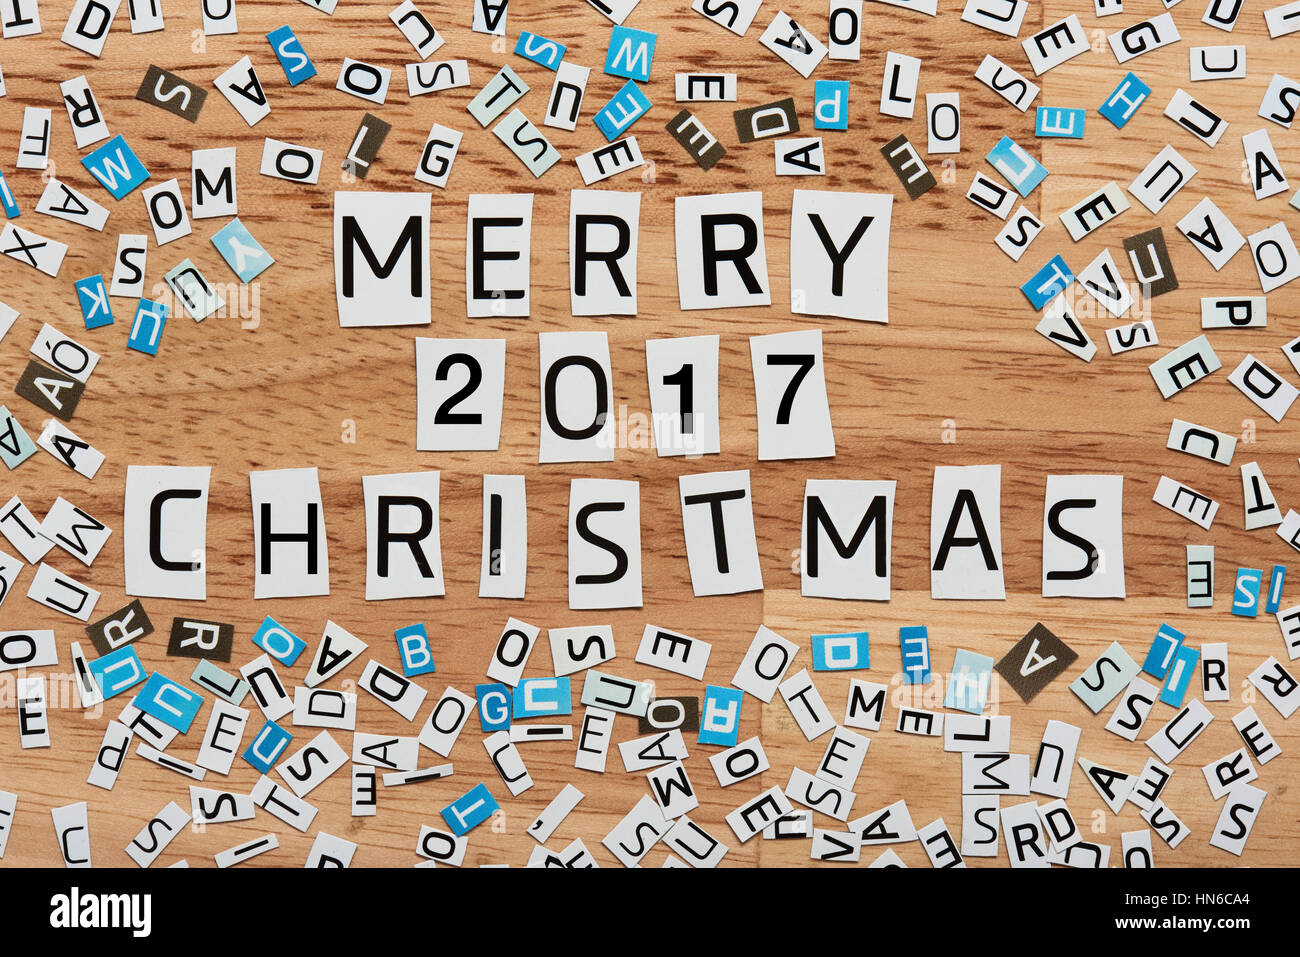 merry 2017 christmas words cut out from magazine Stock Photo